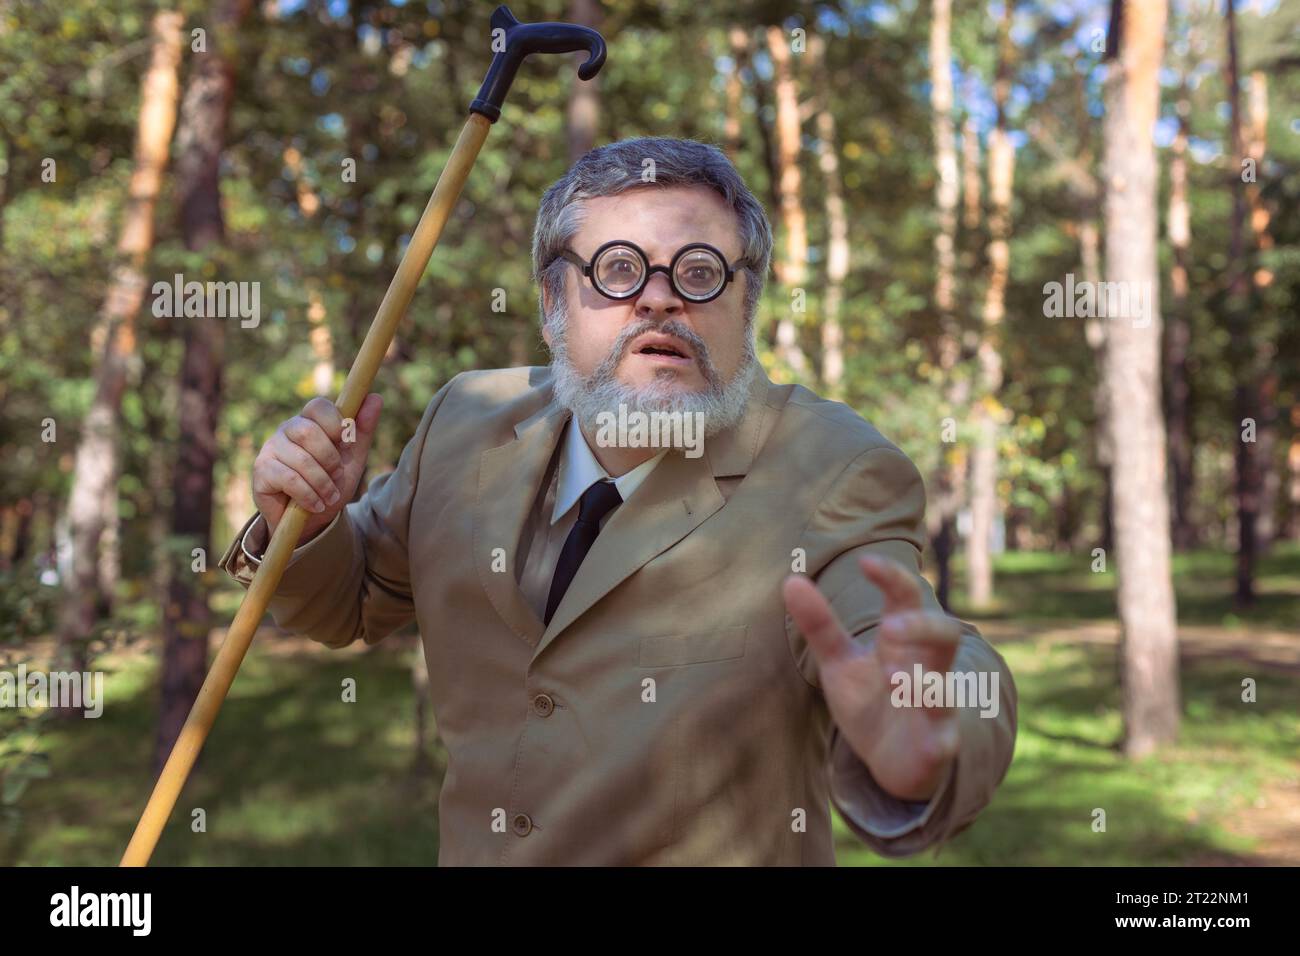 Funny old man with a stick. An elderly man with a walking stick with a funny face. The man has a funny face with a beard. Stock Photo